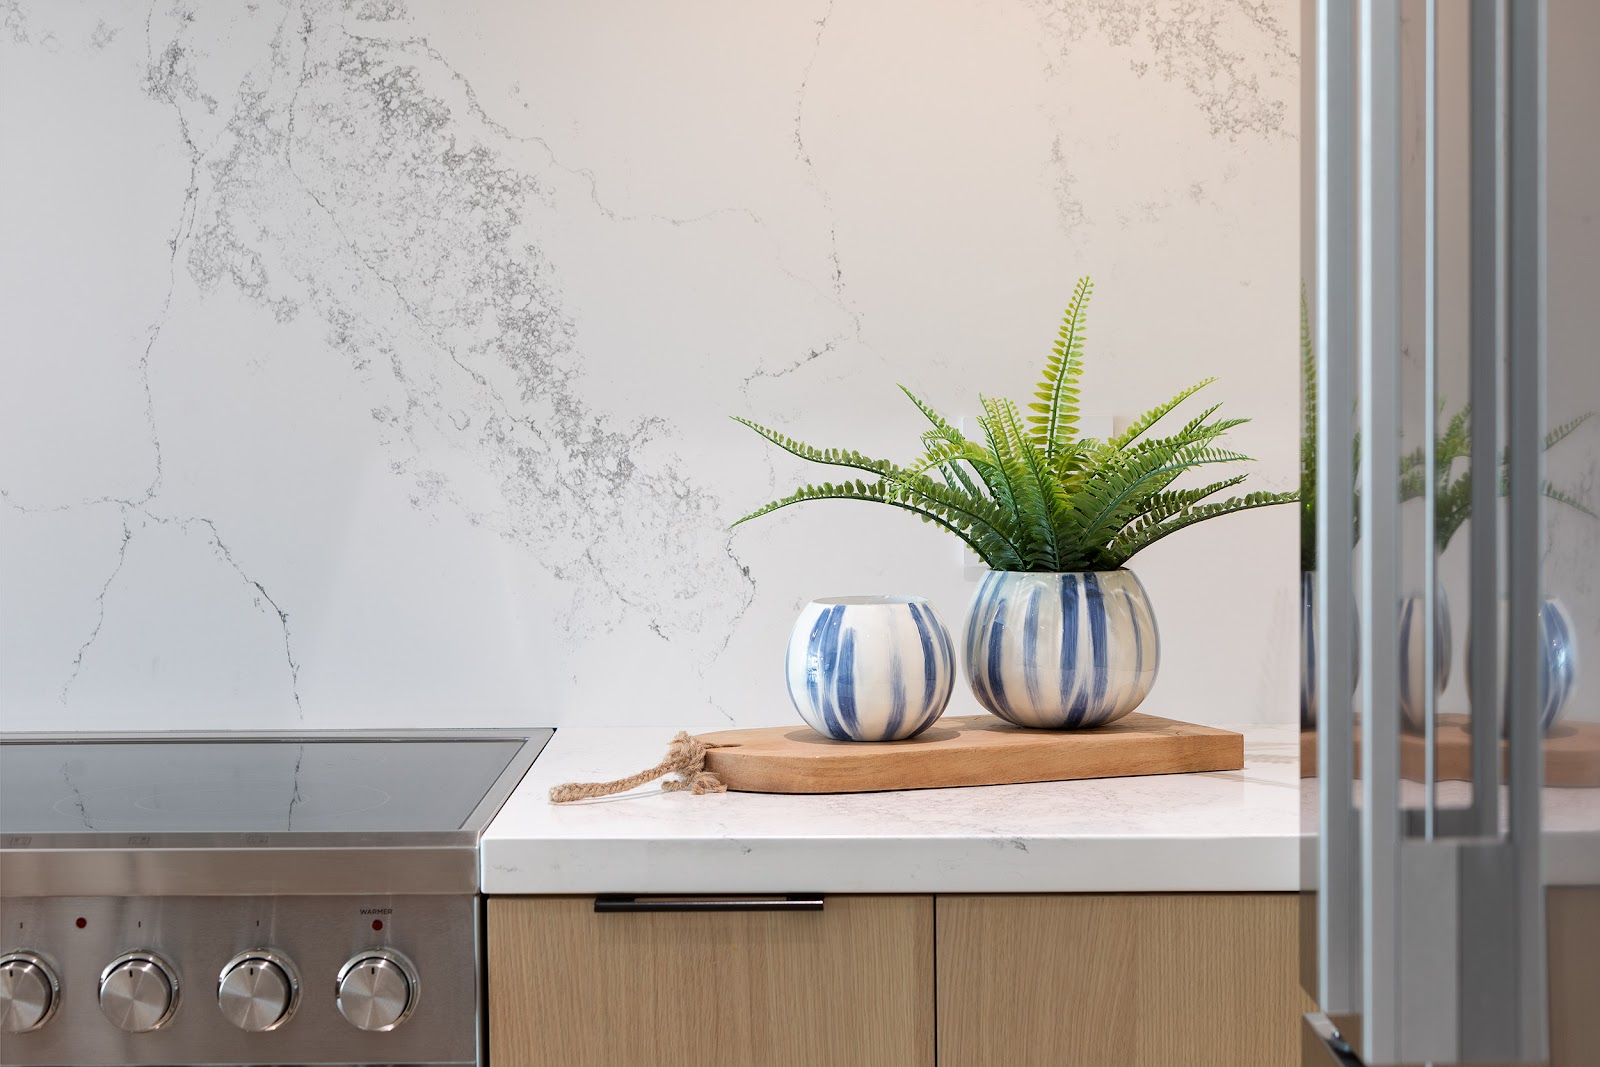 Kitchen countertop detail with plants